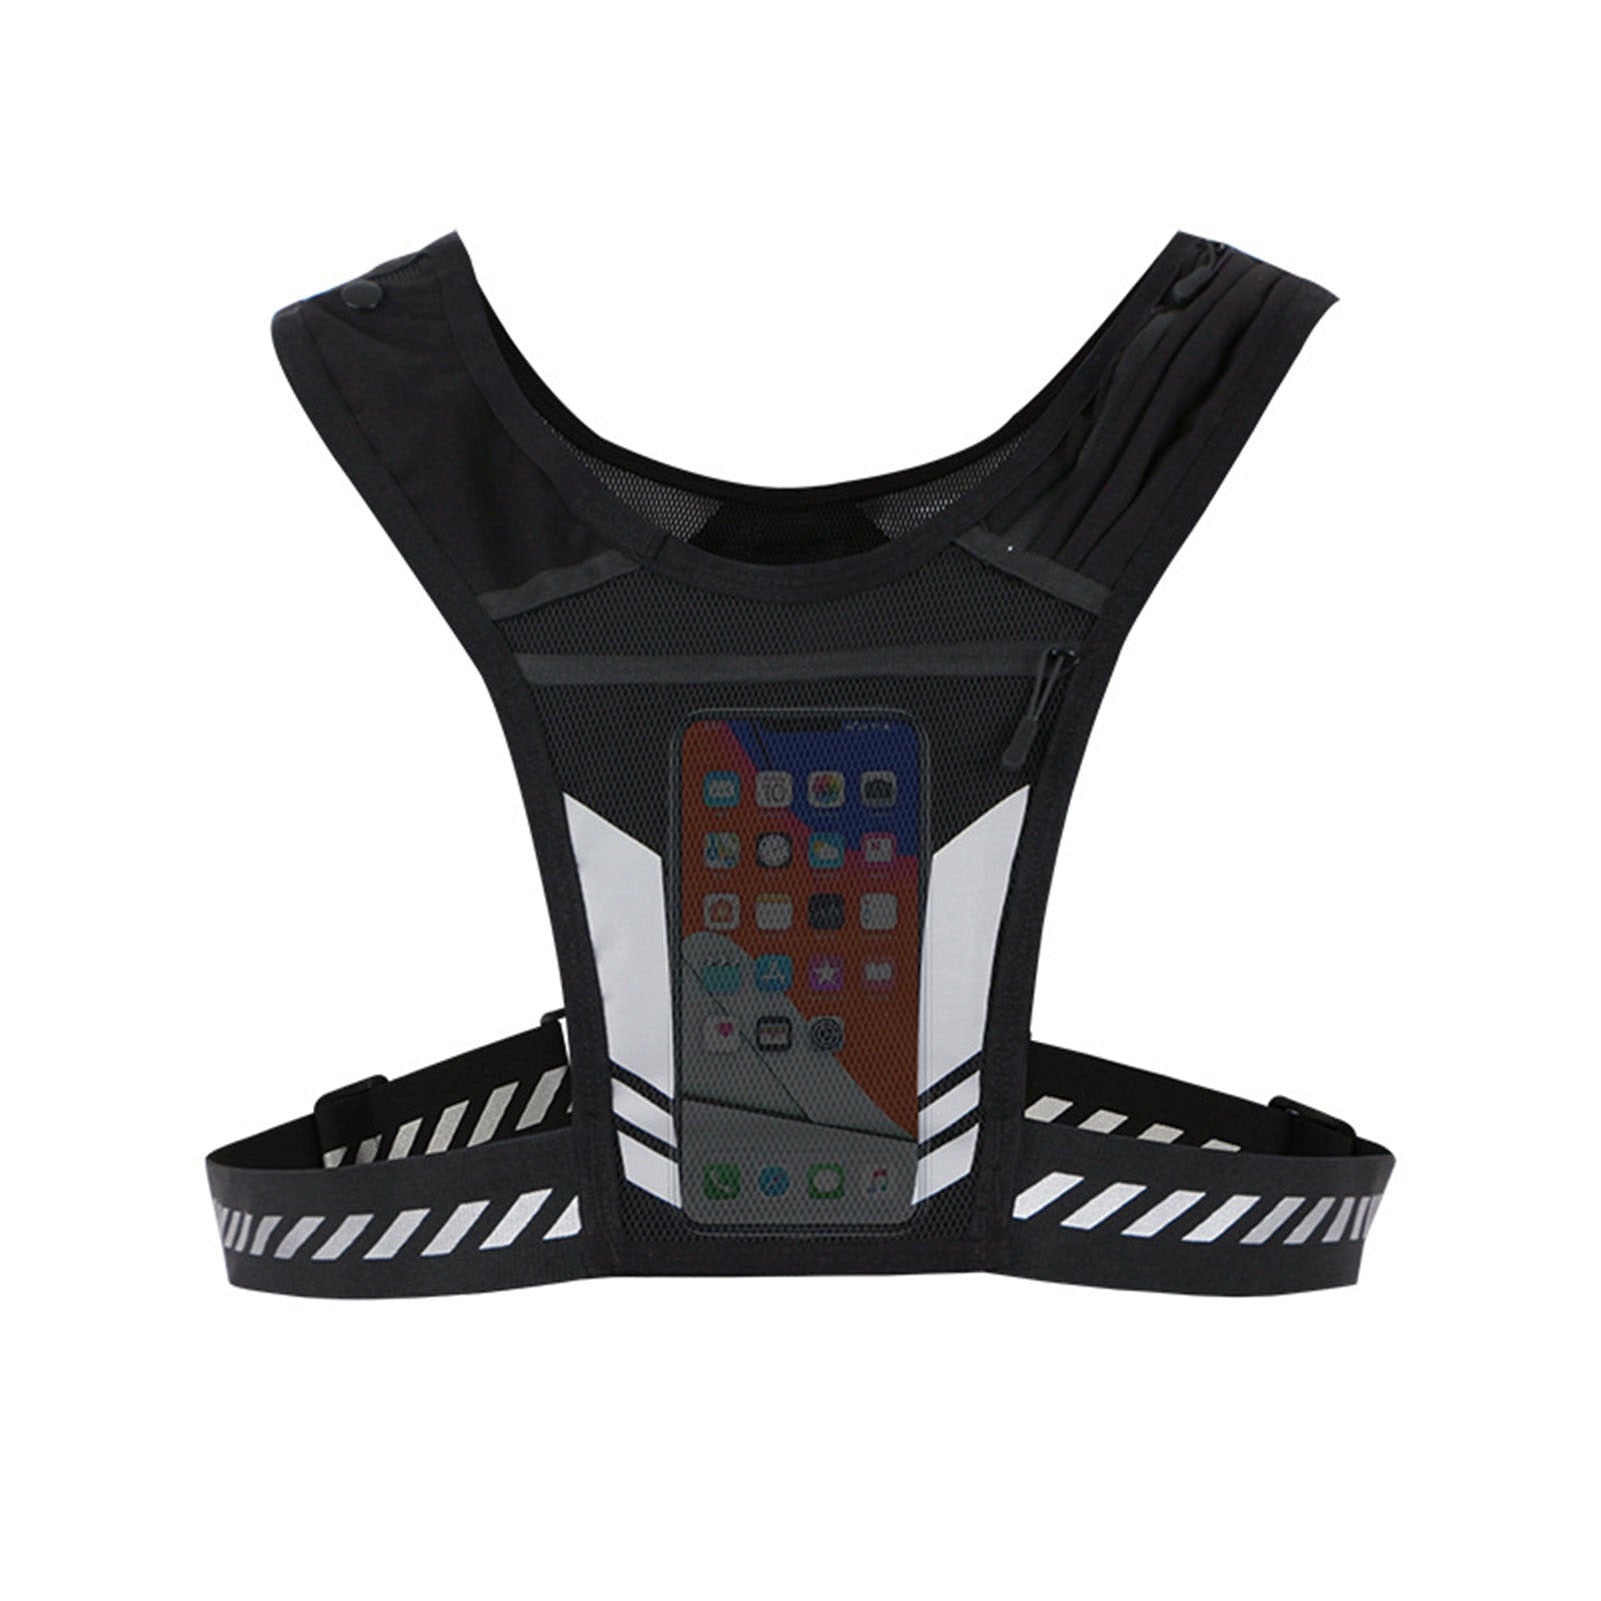 Reflective Elastic Vest for Running and Cycling